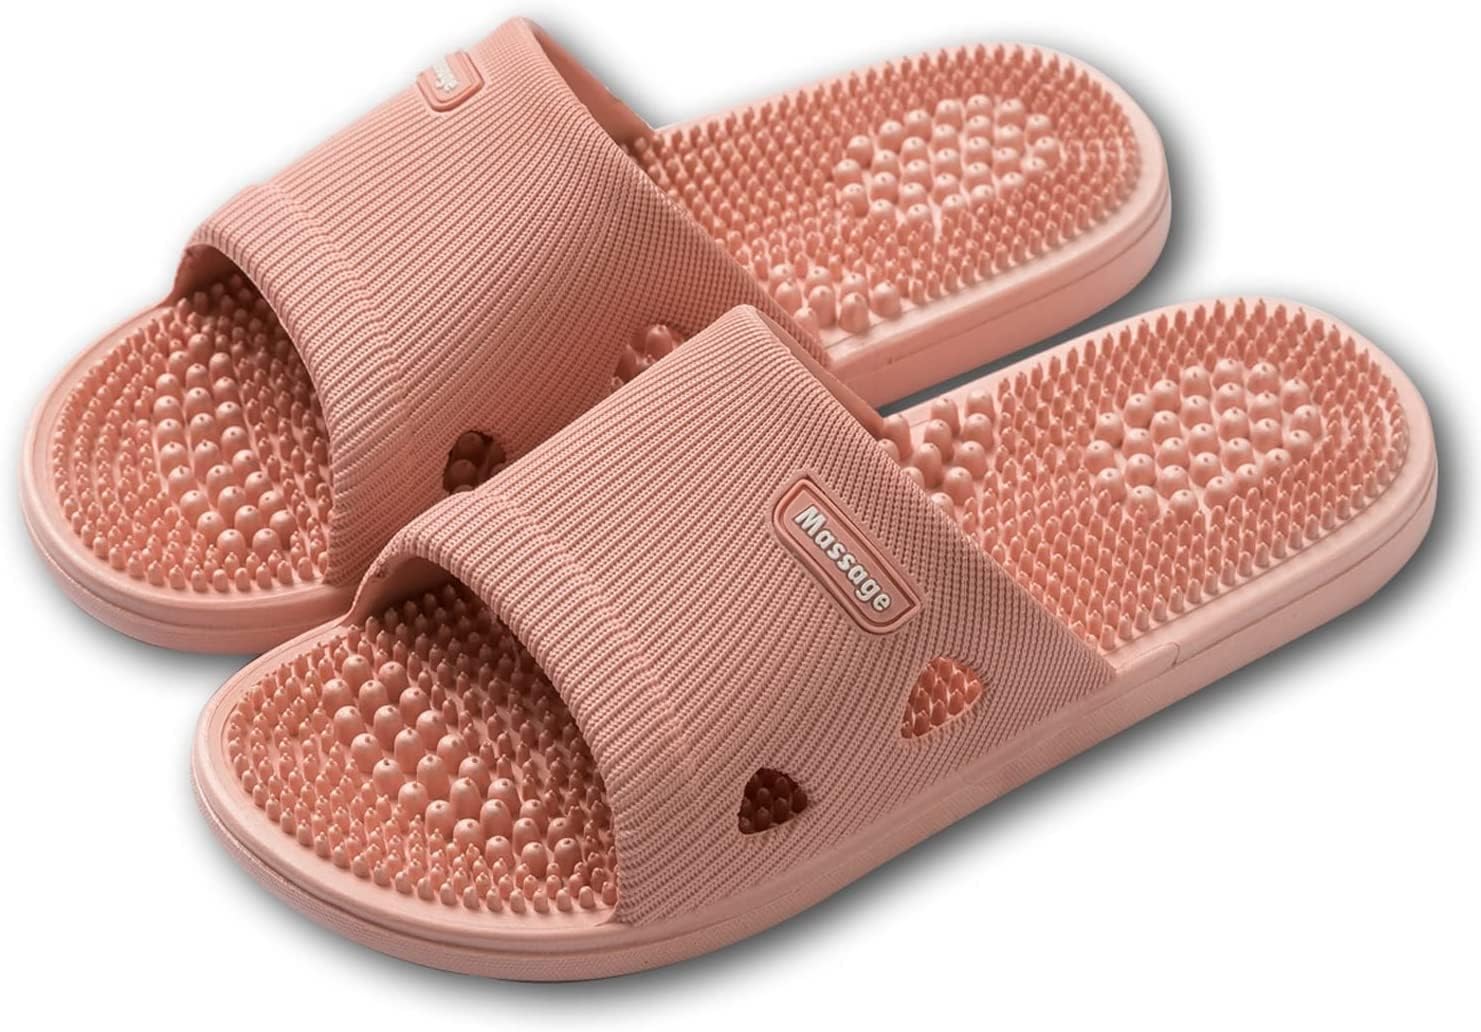 Acupressure Reflexology Bathroom Massage Slippers Shoes Sandals for Men Women Home Shock Absorbing, Therapy Promoting Blood Circulation Myofascial Release Trigger Point